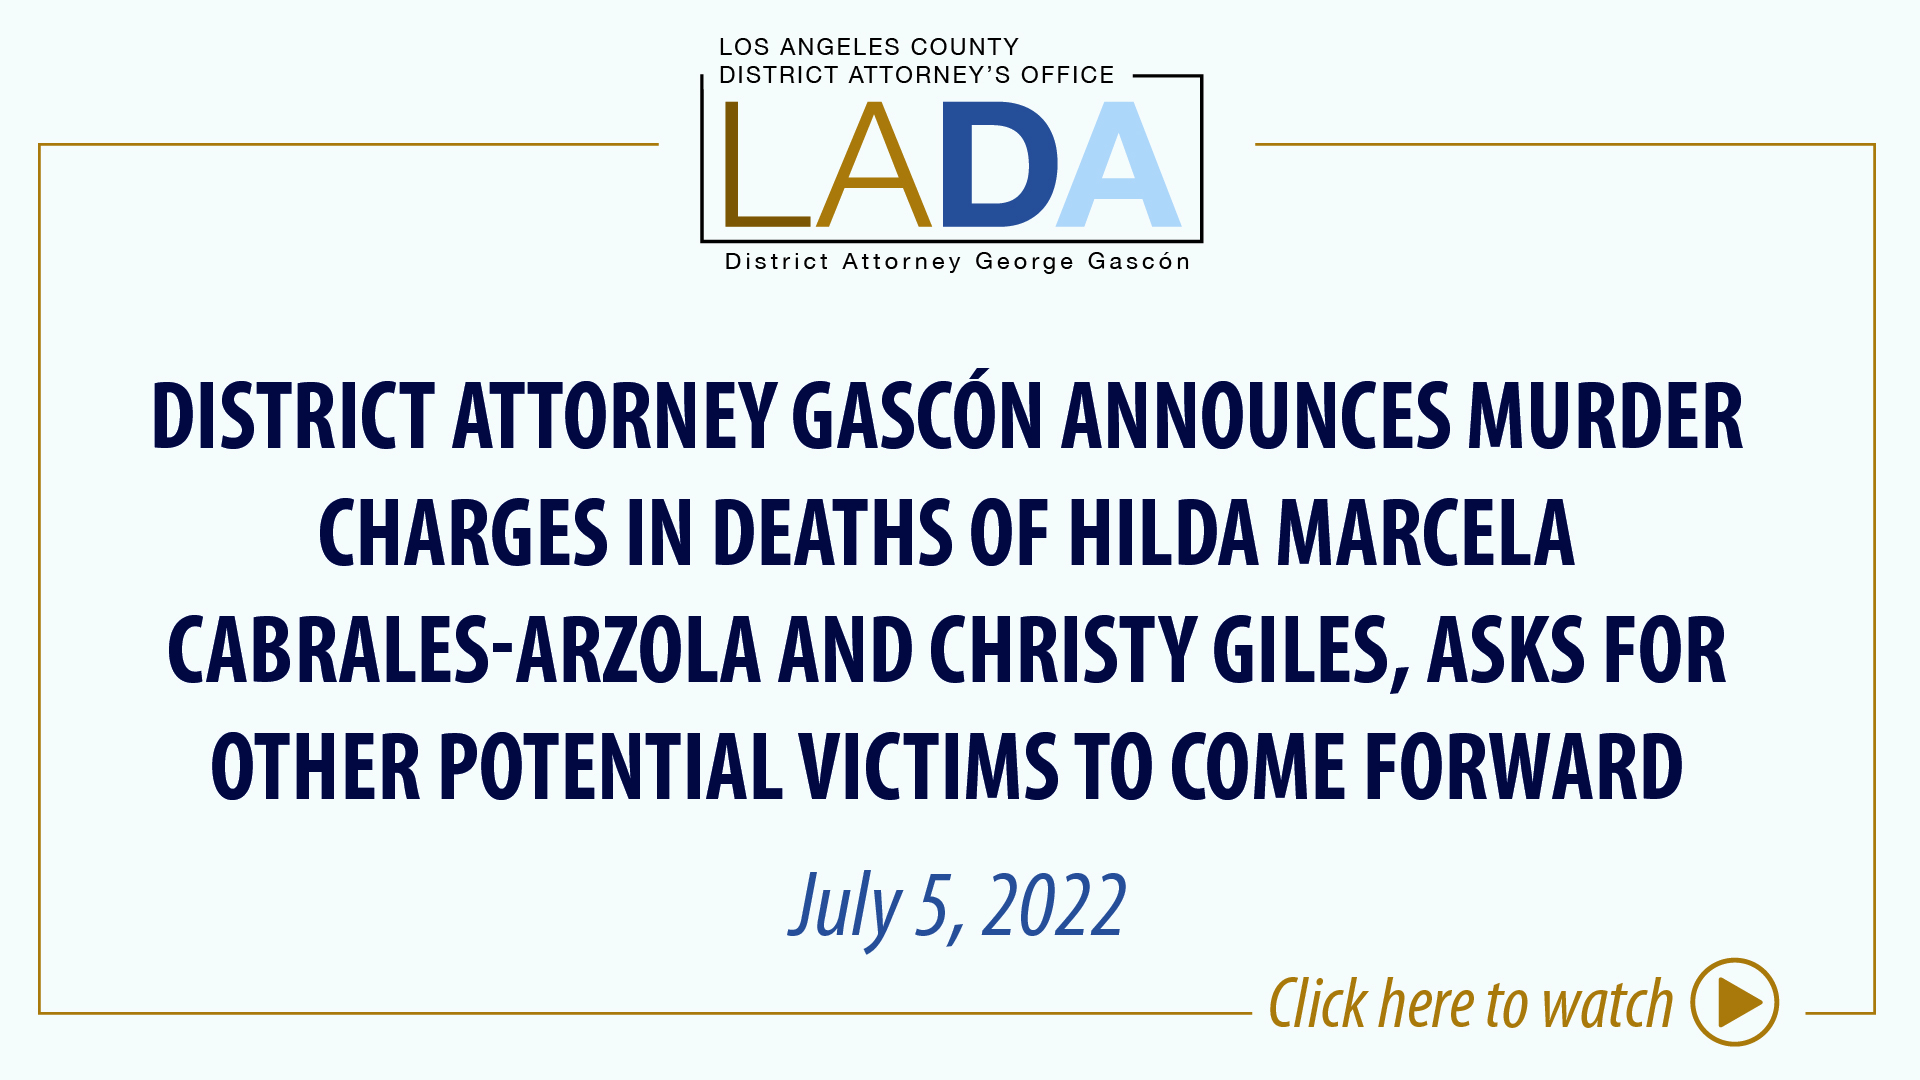 Slide link to news conference of District Attorney Gascón Announces Murder Charges in Deaths of Hilda Marcela Cabrales-Arzola and Christy Giles, Asks for Other Potential Victims to Come Forward